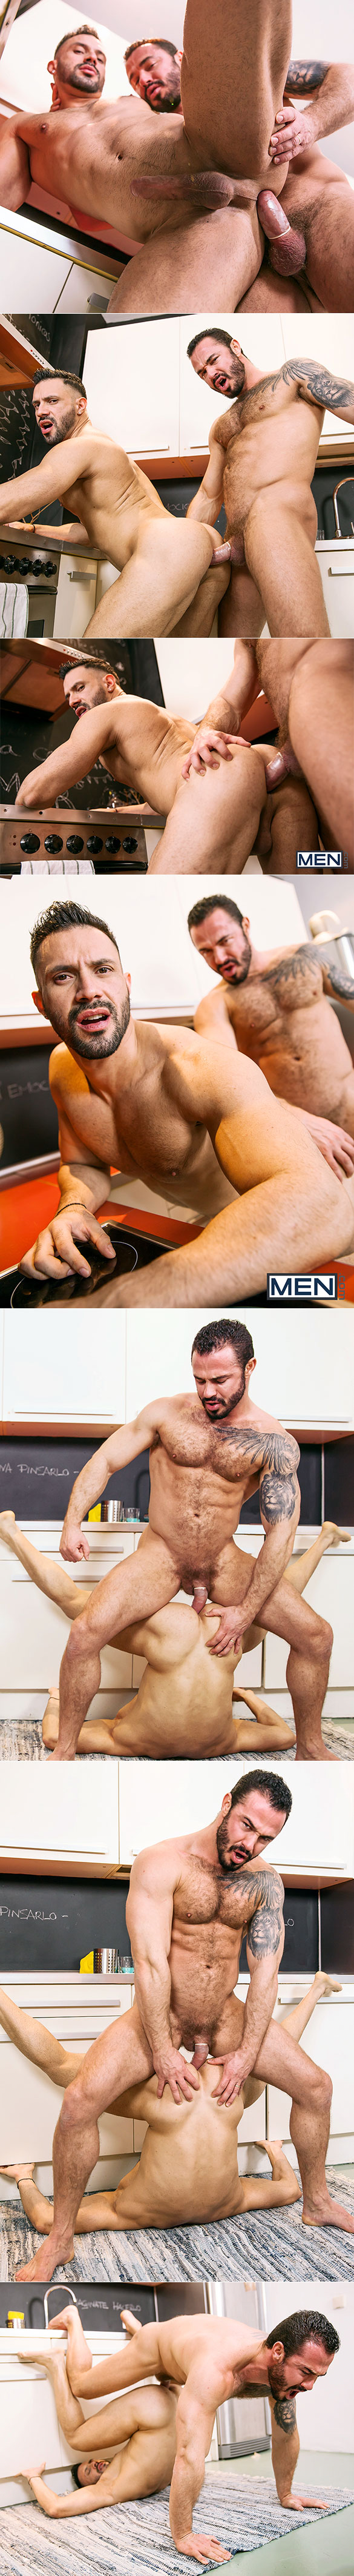 Men.com: Jessy Ares pounds Flex Xtremmo in "Erase and Rewind, Part 3"